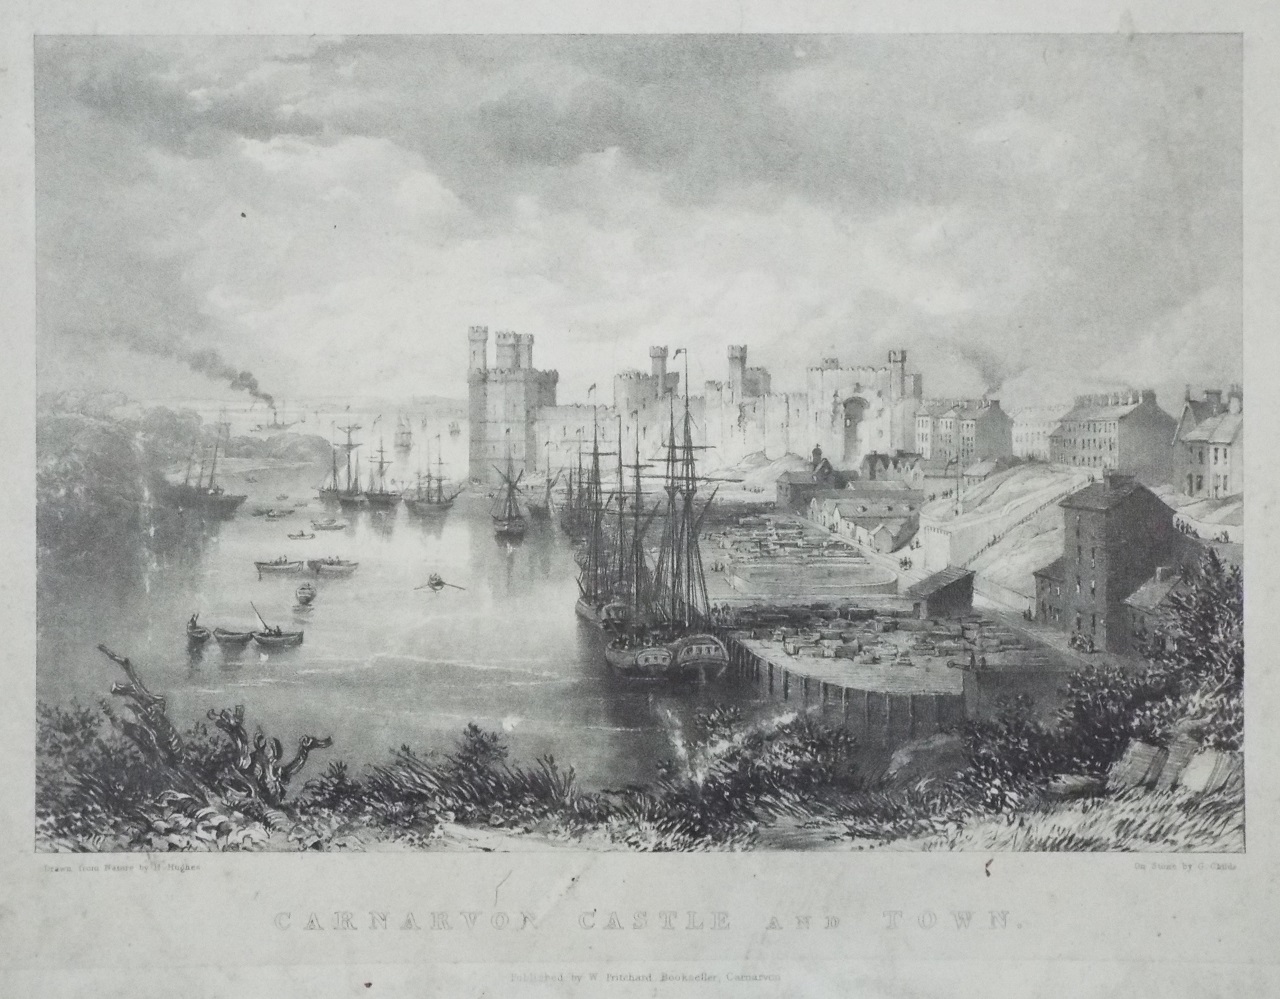 Lithograph - Carnarvon Castle and Town. - Childs